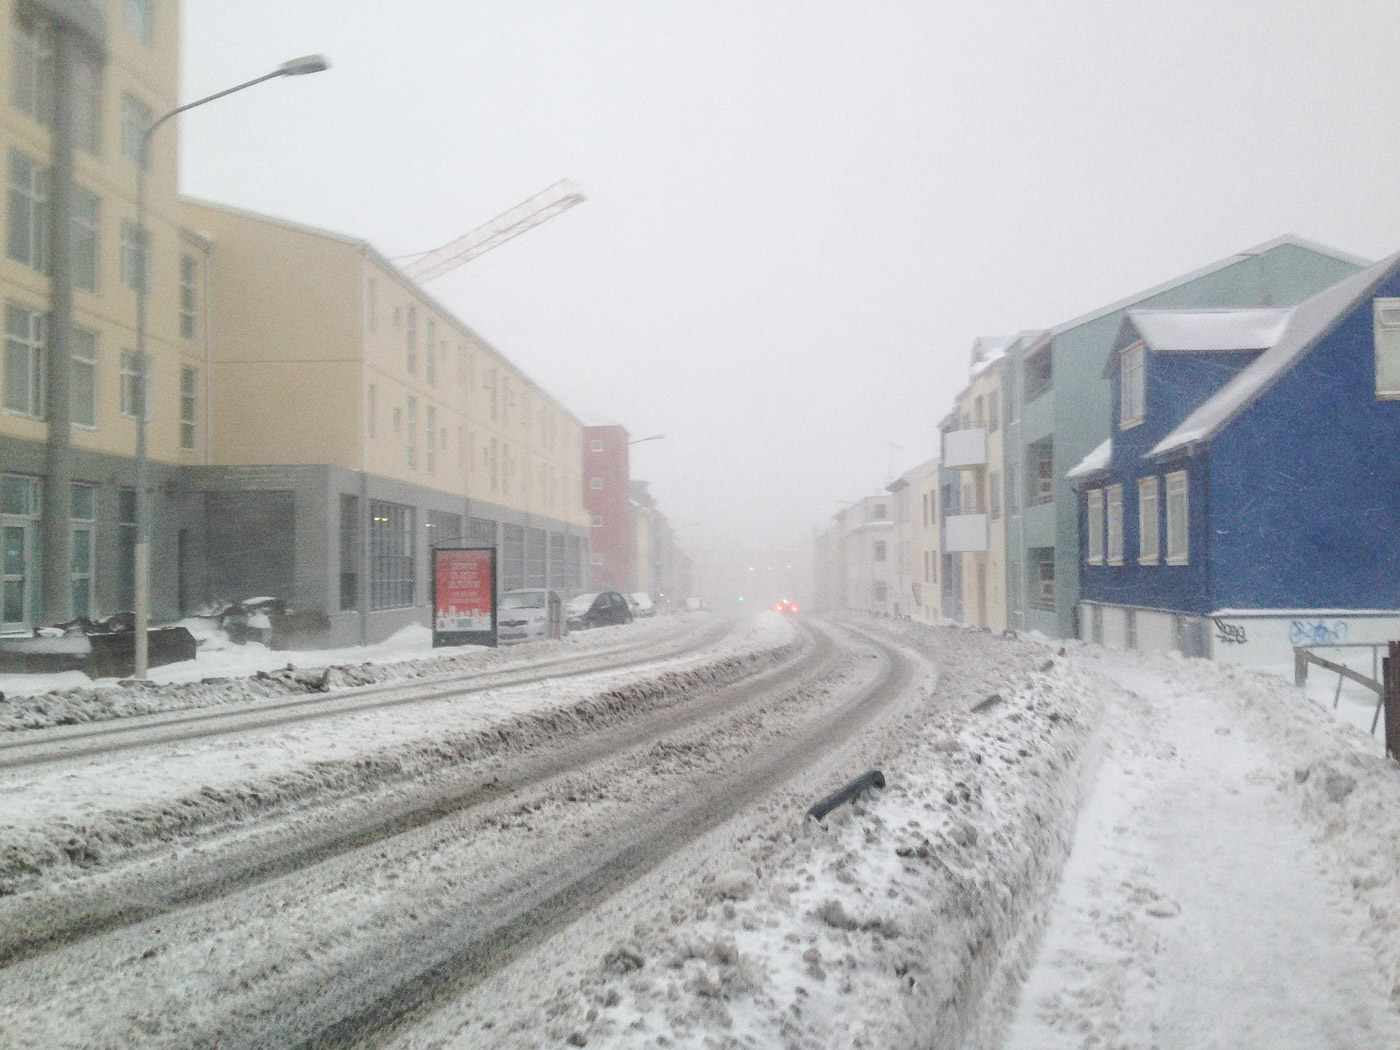 Reykjavík. A month in snow and ice. - XIX. (3 till 30 December 2014)